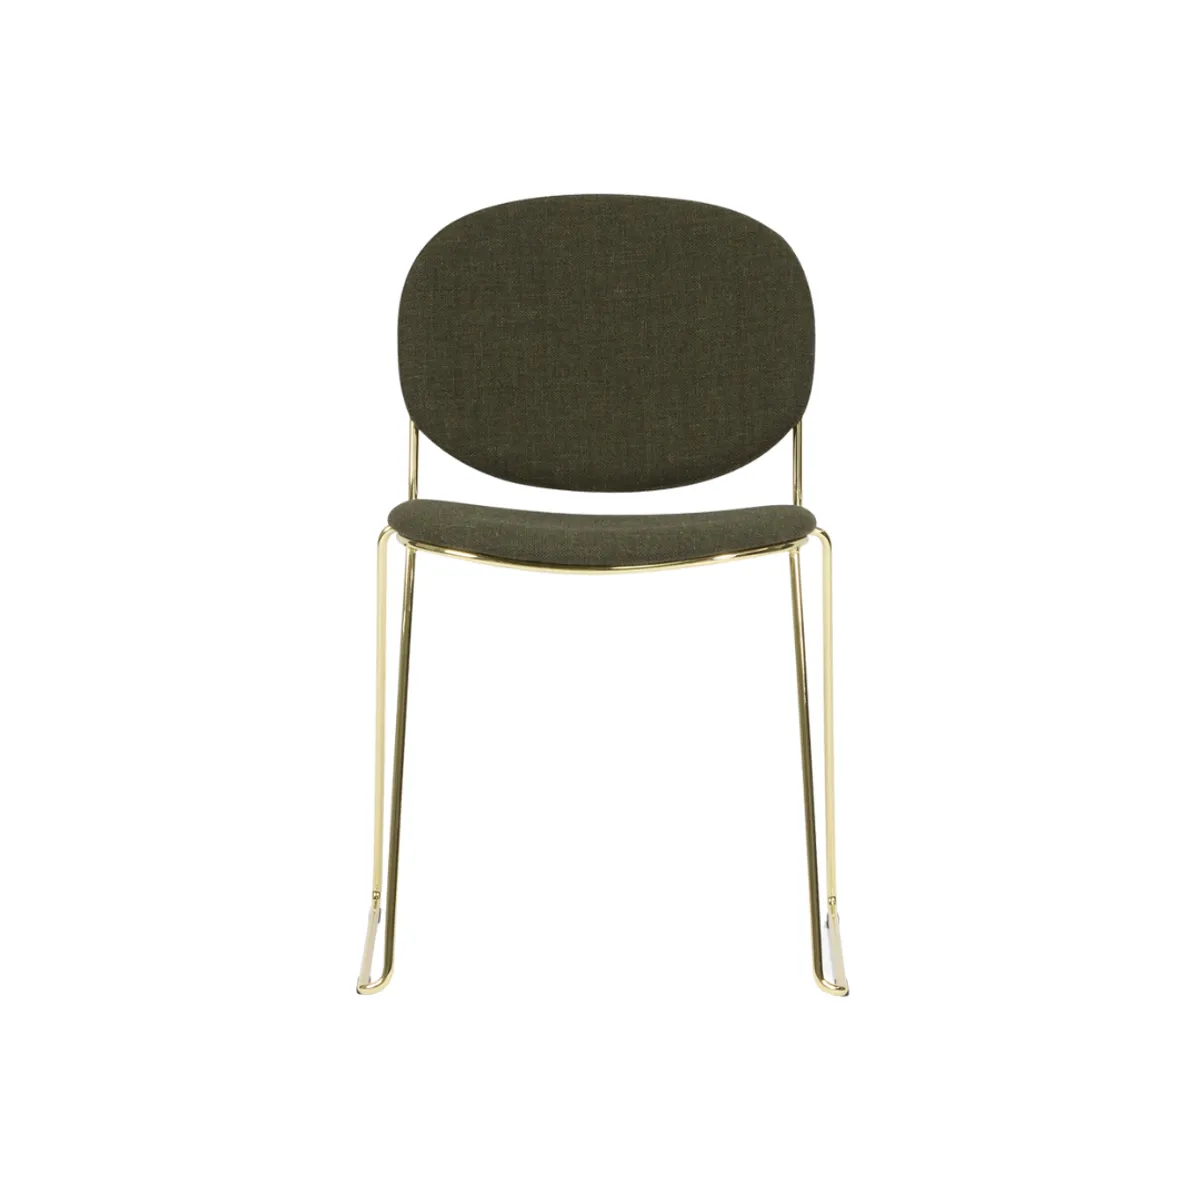 Timo stacking chair 1